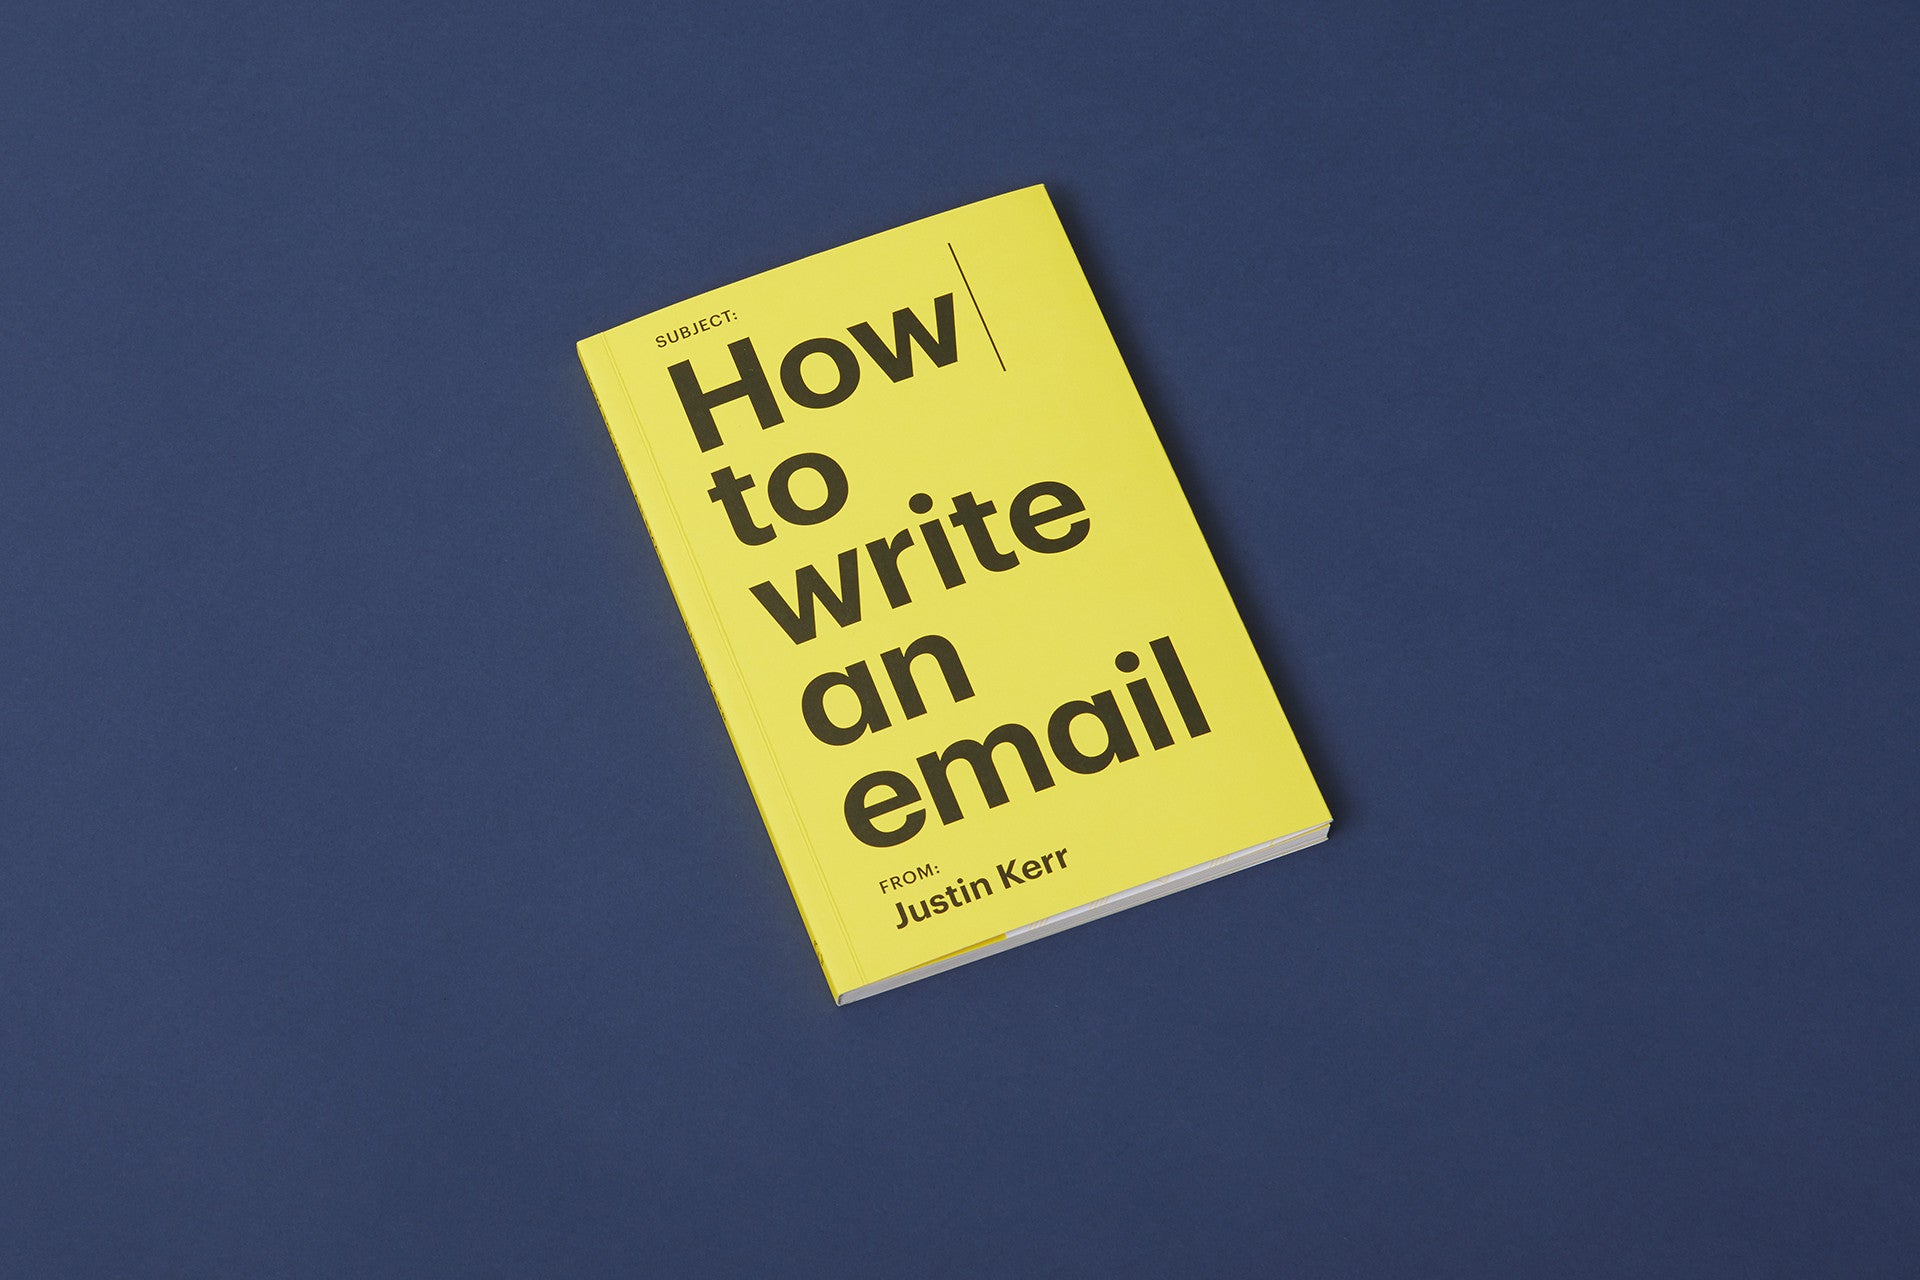 How to write an email: Second Edition